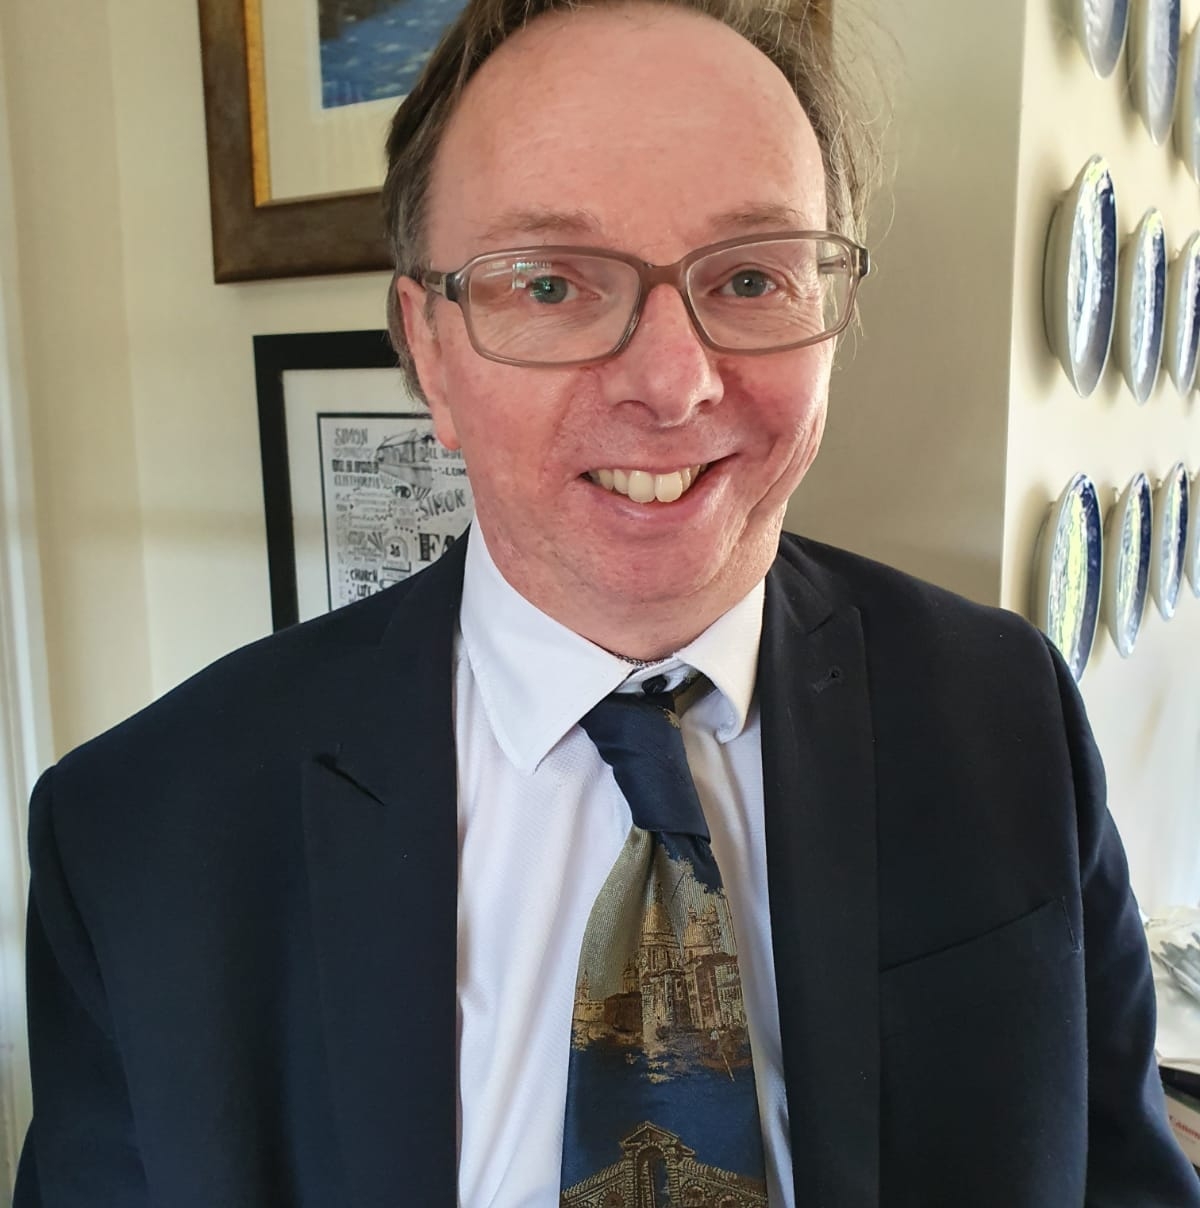 Image of Dr Simon Wilkinson in front of a cream coloured wall with decorations, wearing a dark suit jacket over a white shirt and multicoloured tie. 